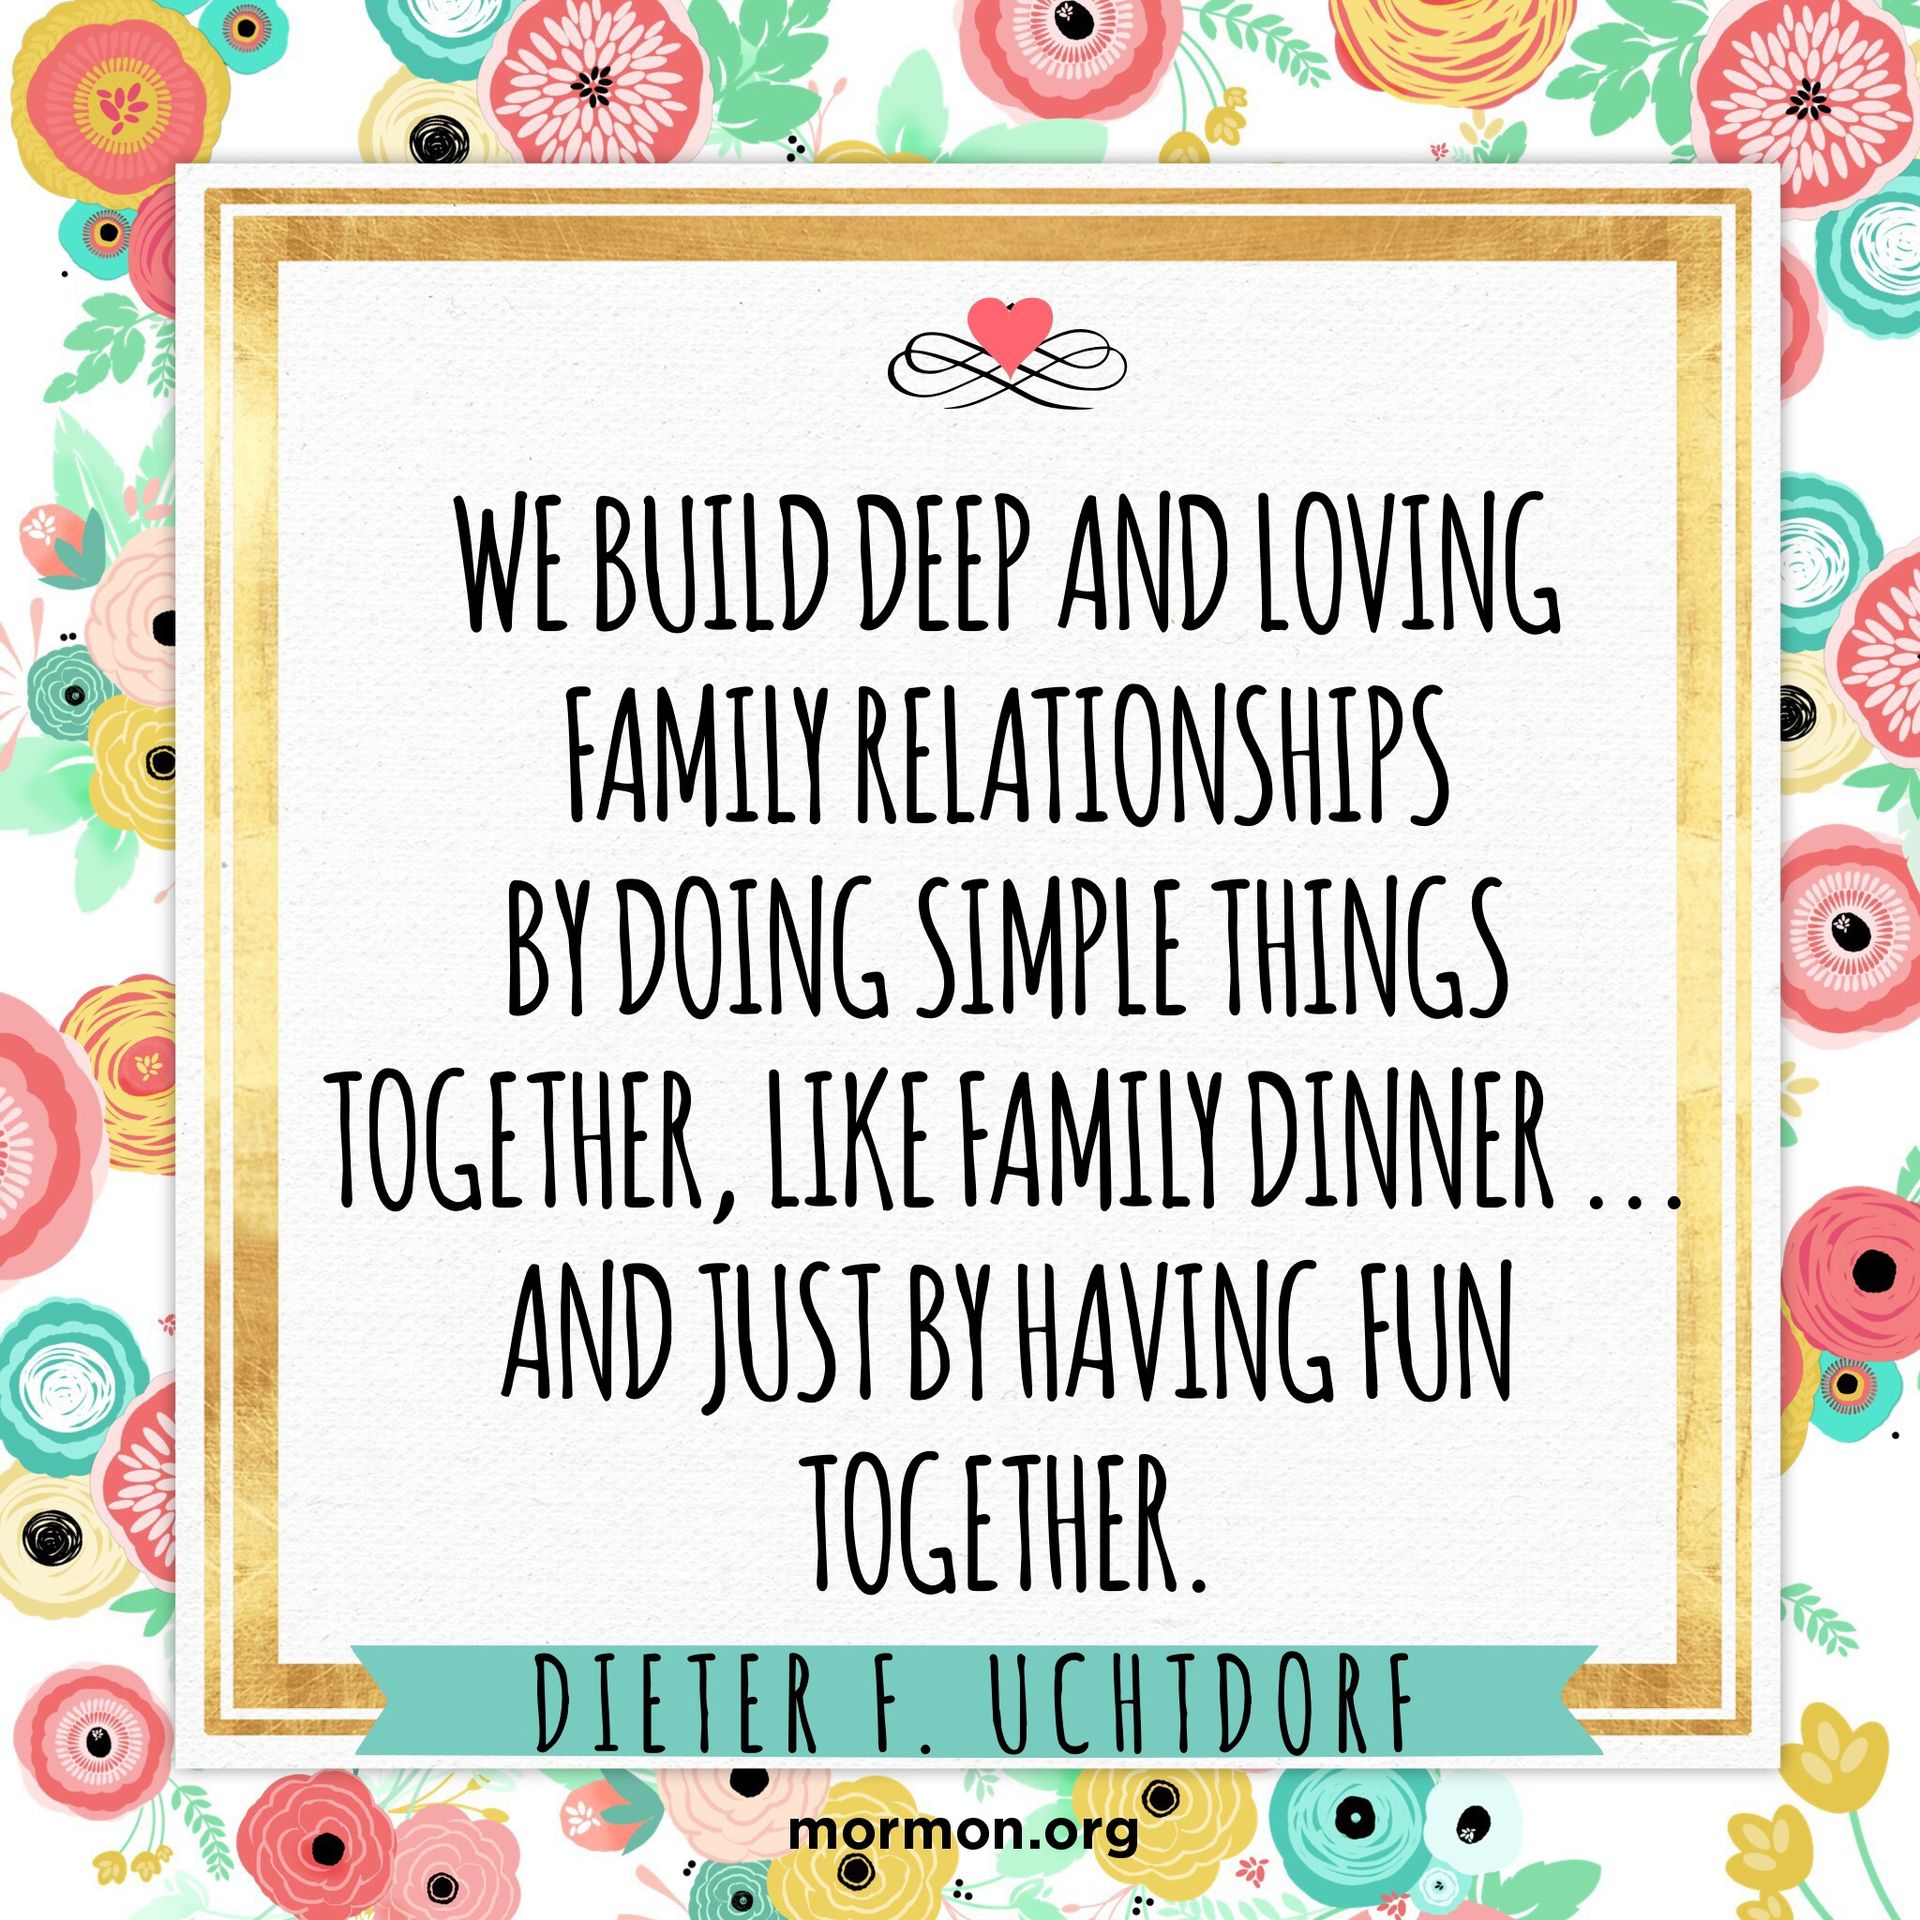 “We build deep and loving family relationships by doing simple things together, like family dinner … and just by having fun together.”—President Dieter F. Uchtdorf, “Of Things That Matter Most”